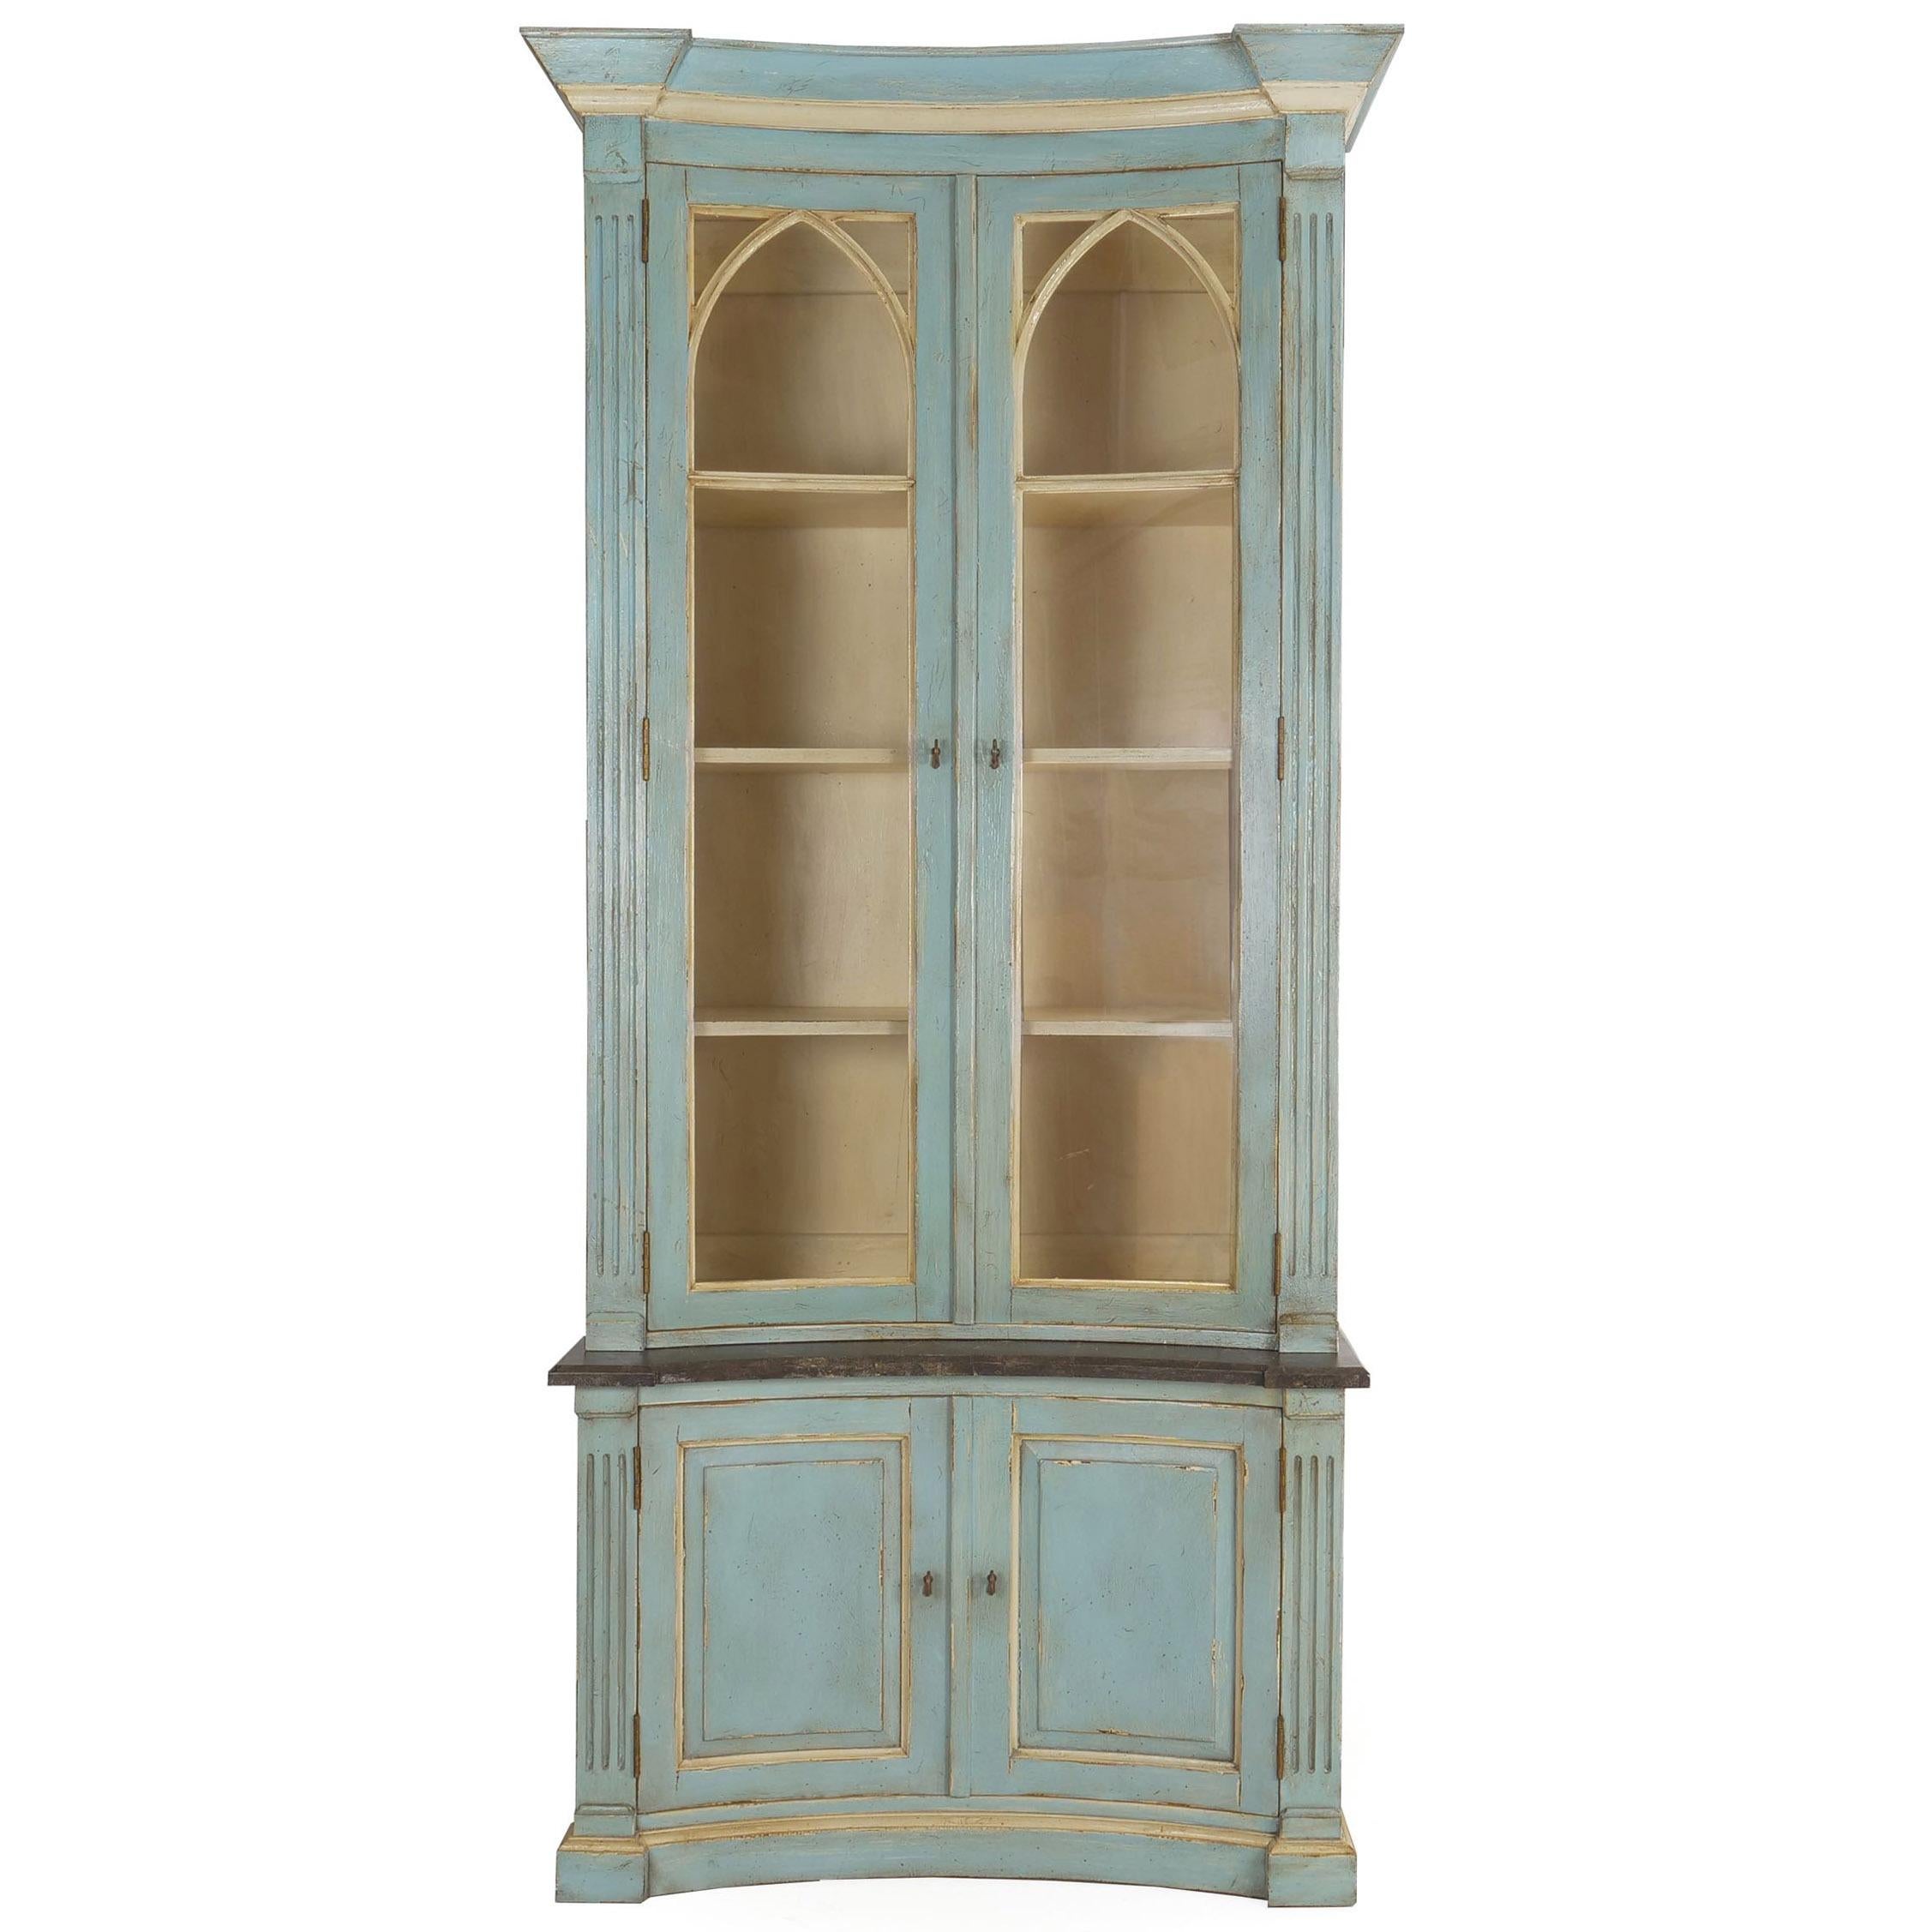 Swedish style blue painted two-part bookcase cabinet,
circa 21st century, retailed by Lillian August
Item # 008MGP26M 

This is a gorgeous designer piece retailed by Lillian August and is built in two parts for easy transport. The upper features